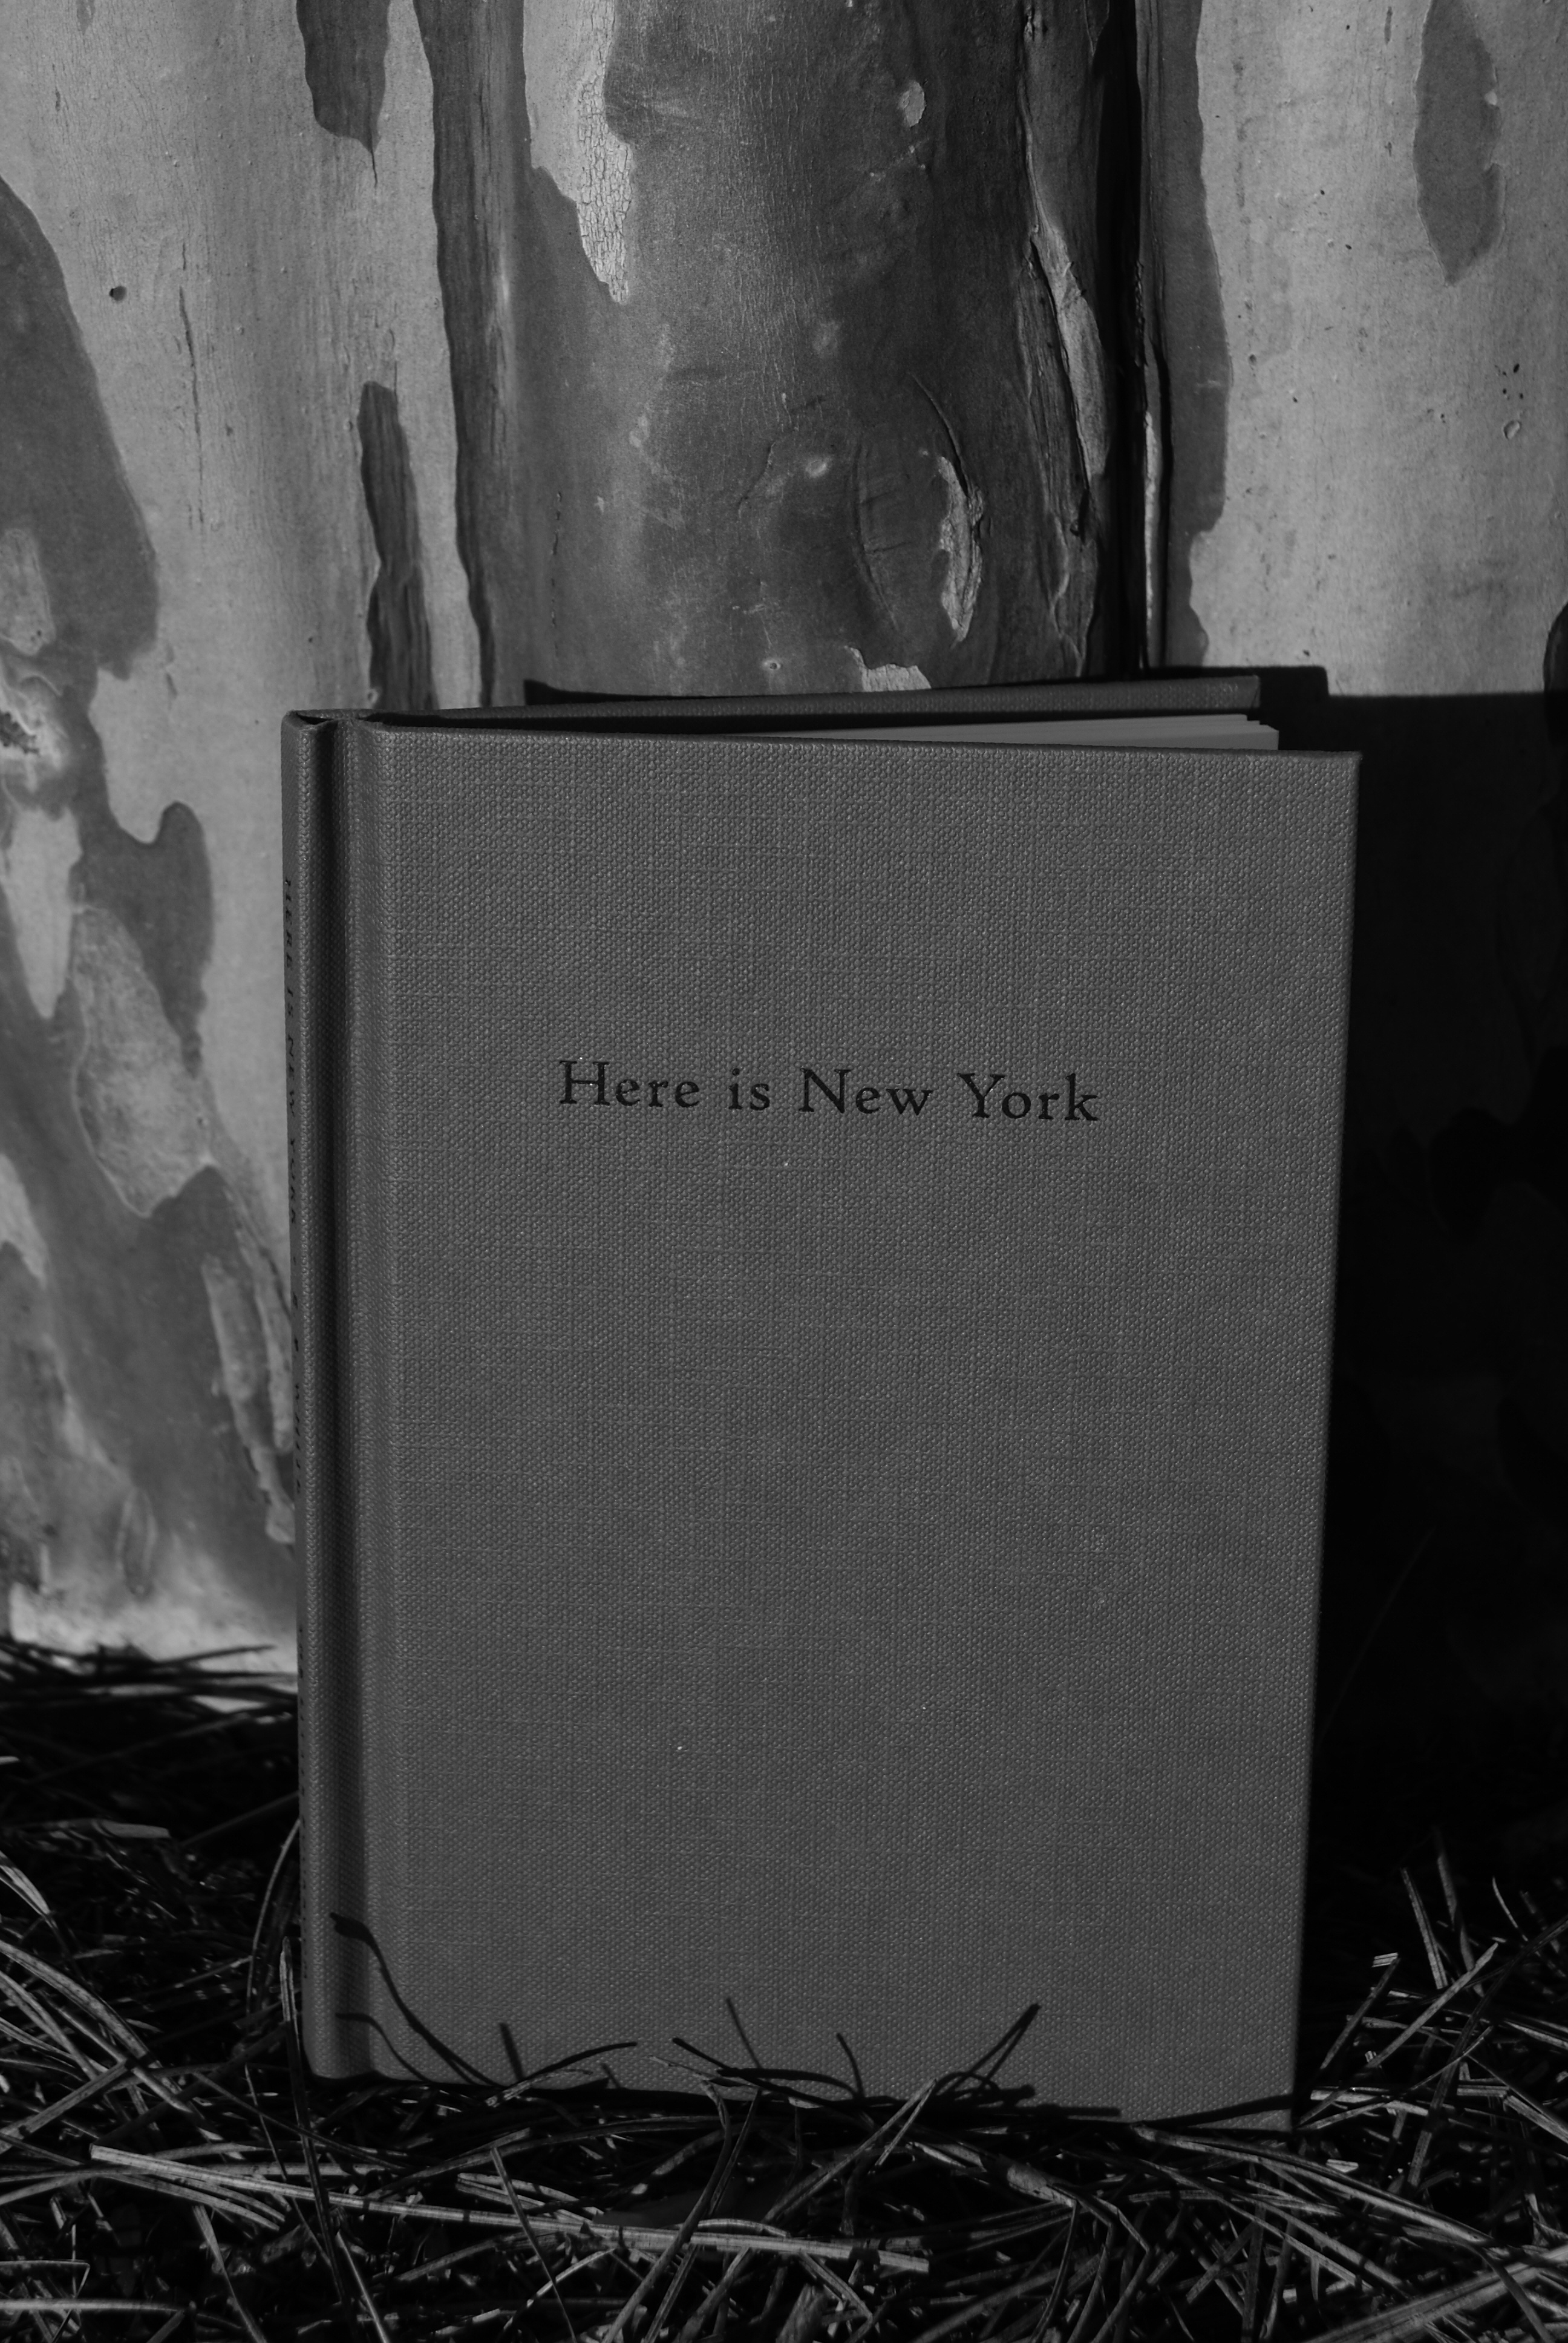 Eb white essay about new york